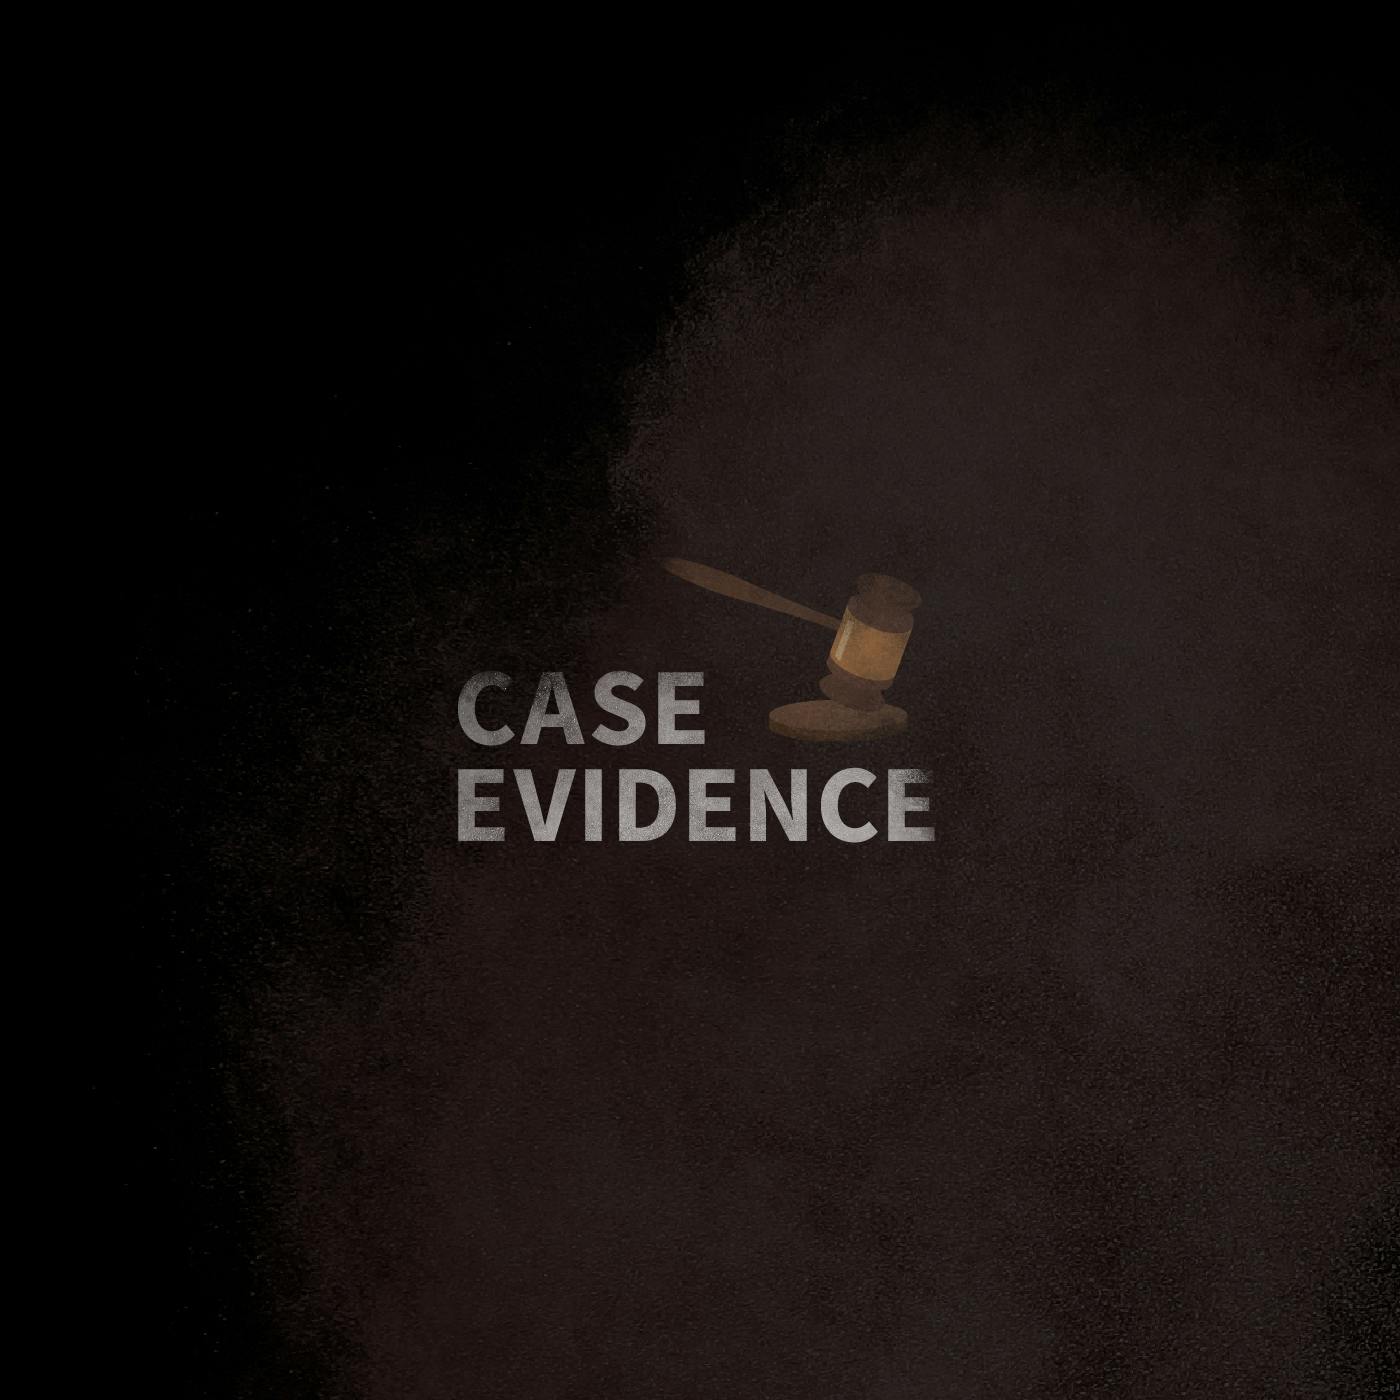 Case Evidence 10.31.16 by Tenderfoot TV